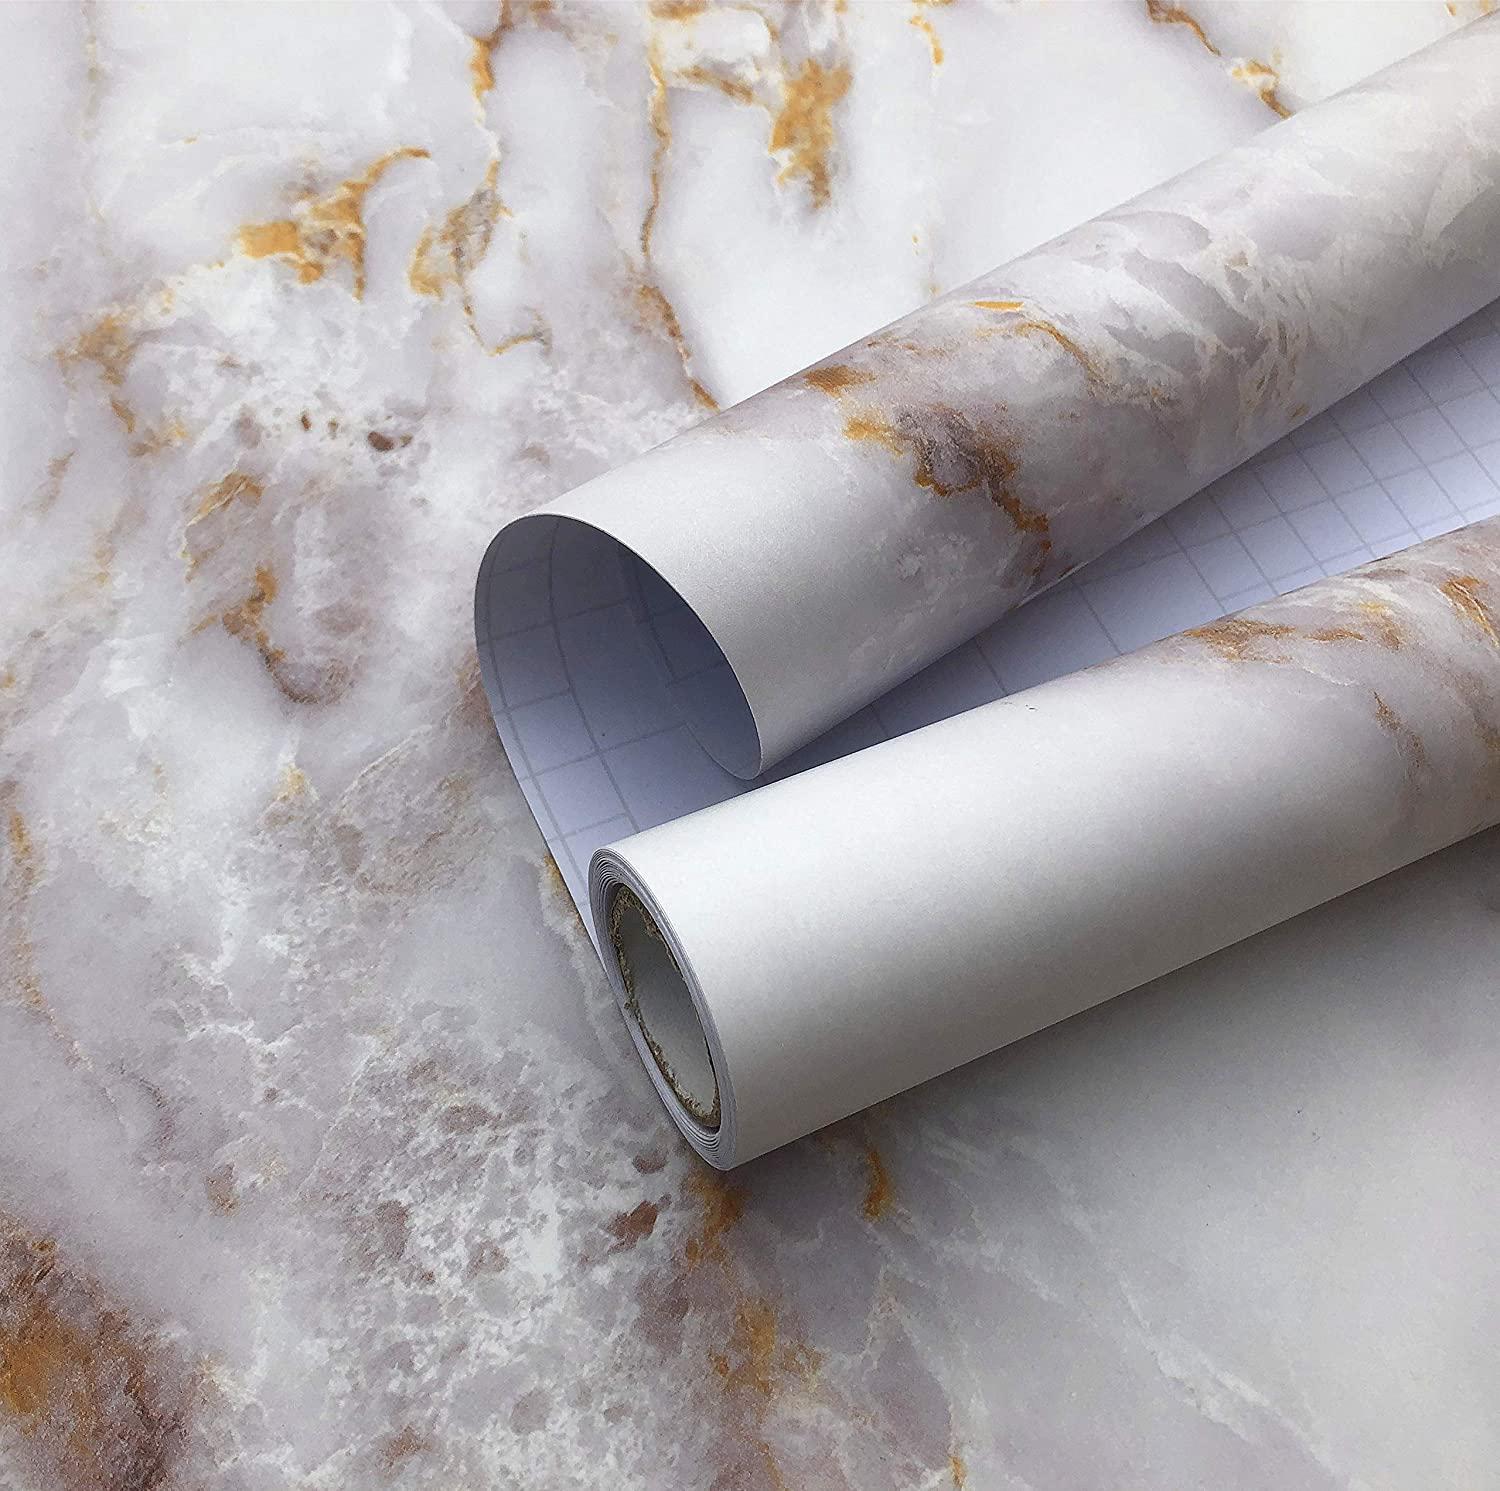 AVISK, Marble White Wallpaper Thickened Marble Matte Contact Paper Bathroom countertop Decorative Paper Waterproof Removable countertop Bathroom Contact Paper(15.7 x 78.7 )